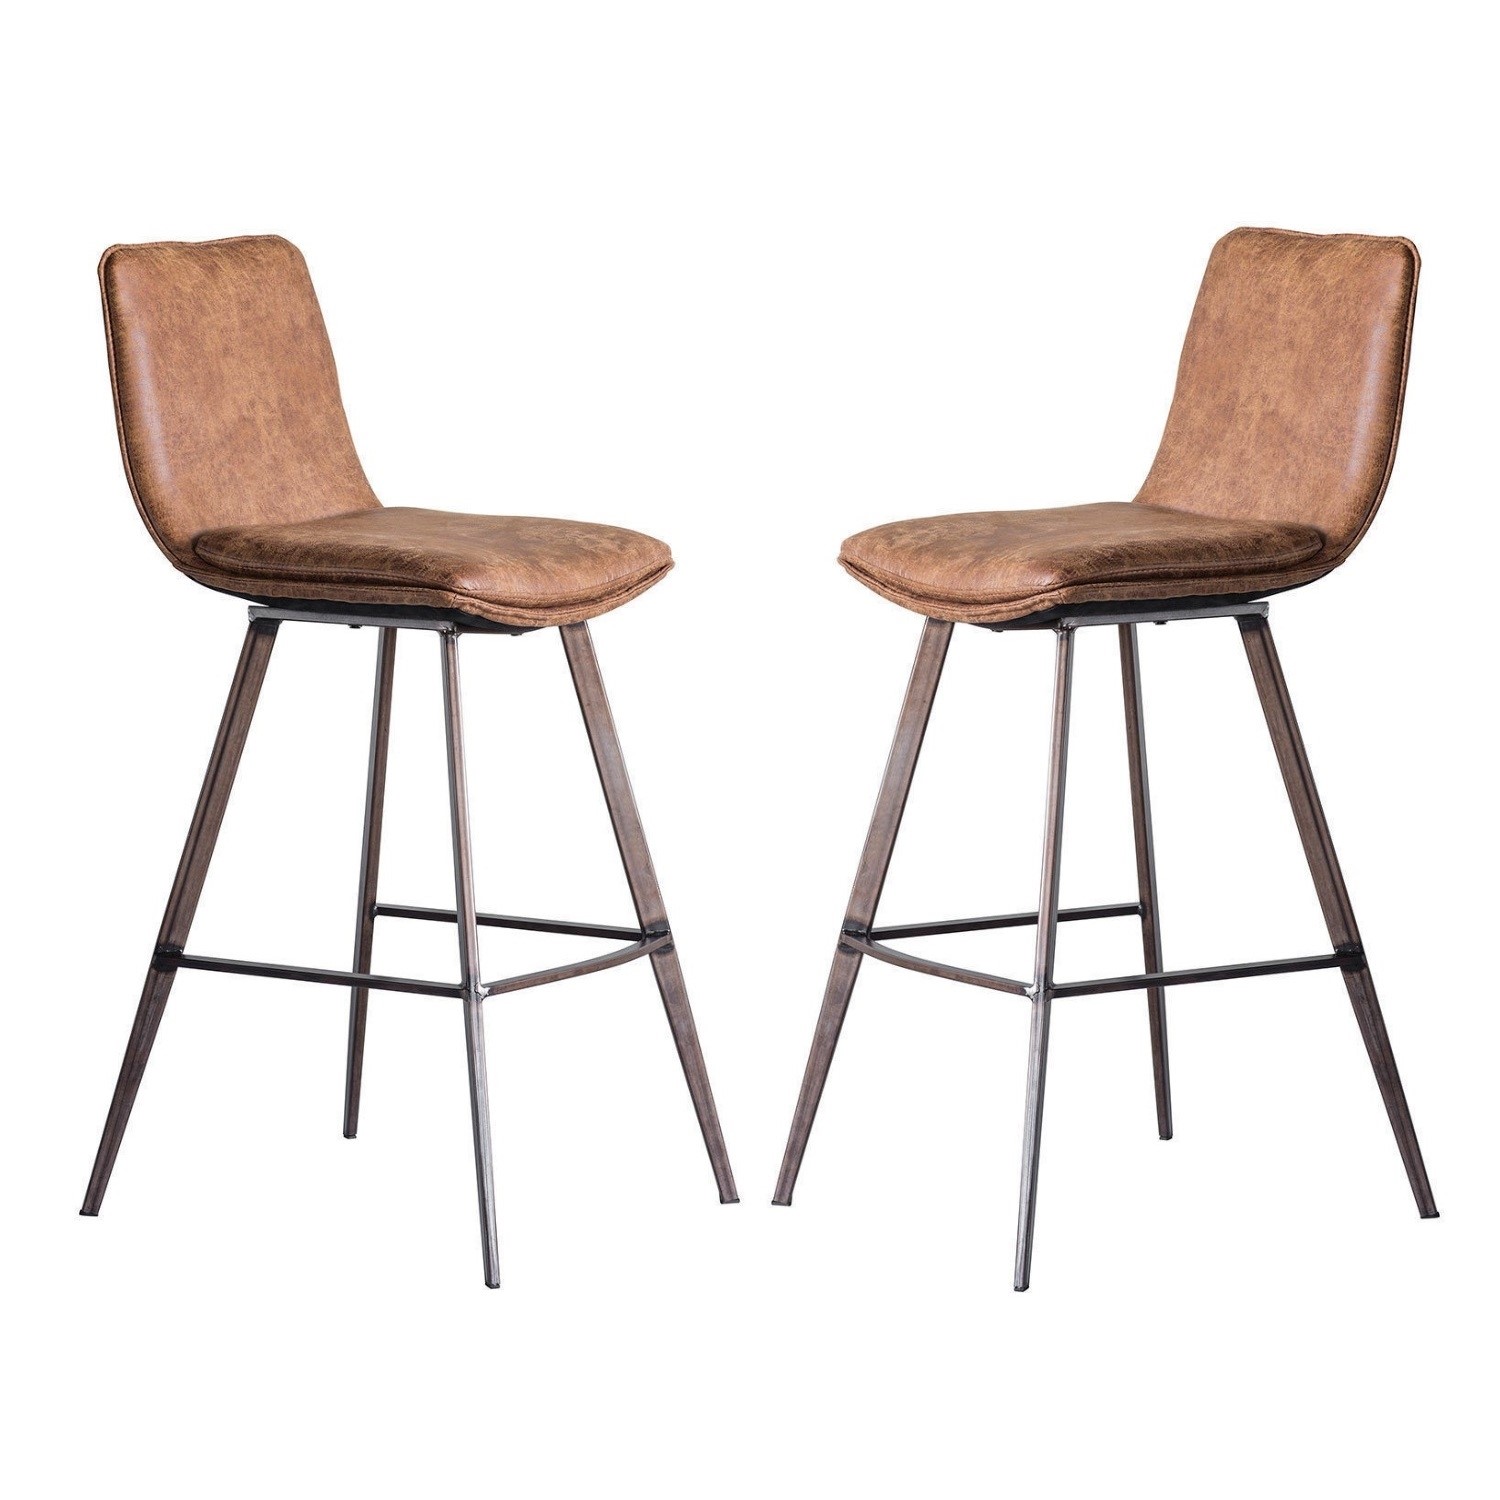 Photo of Set of 2 tan faux leather bar stools with backs - caspian house